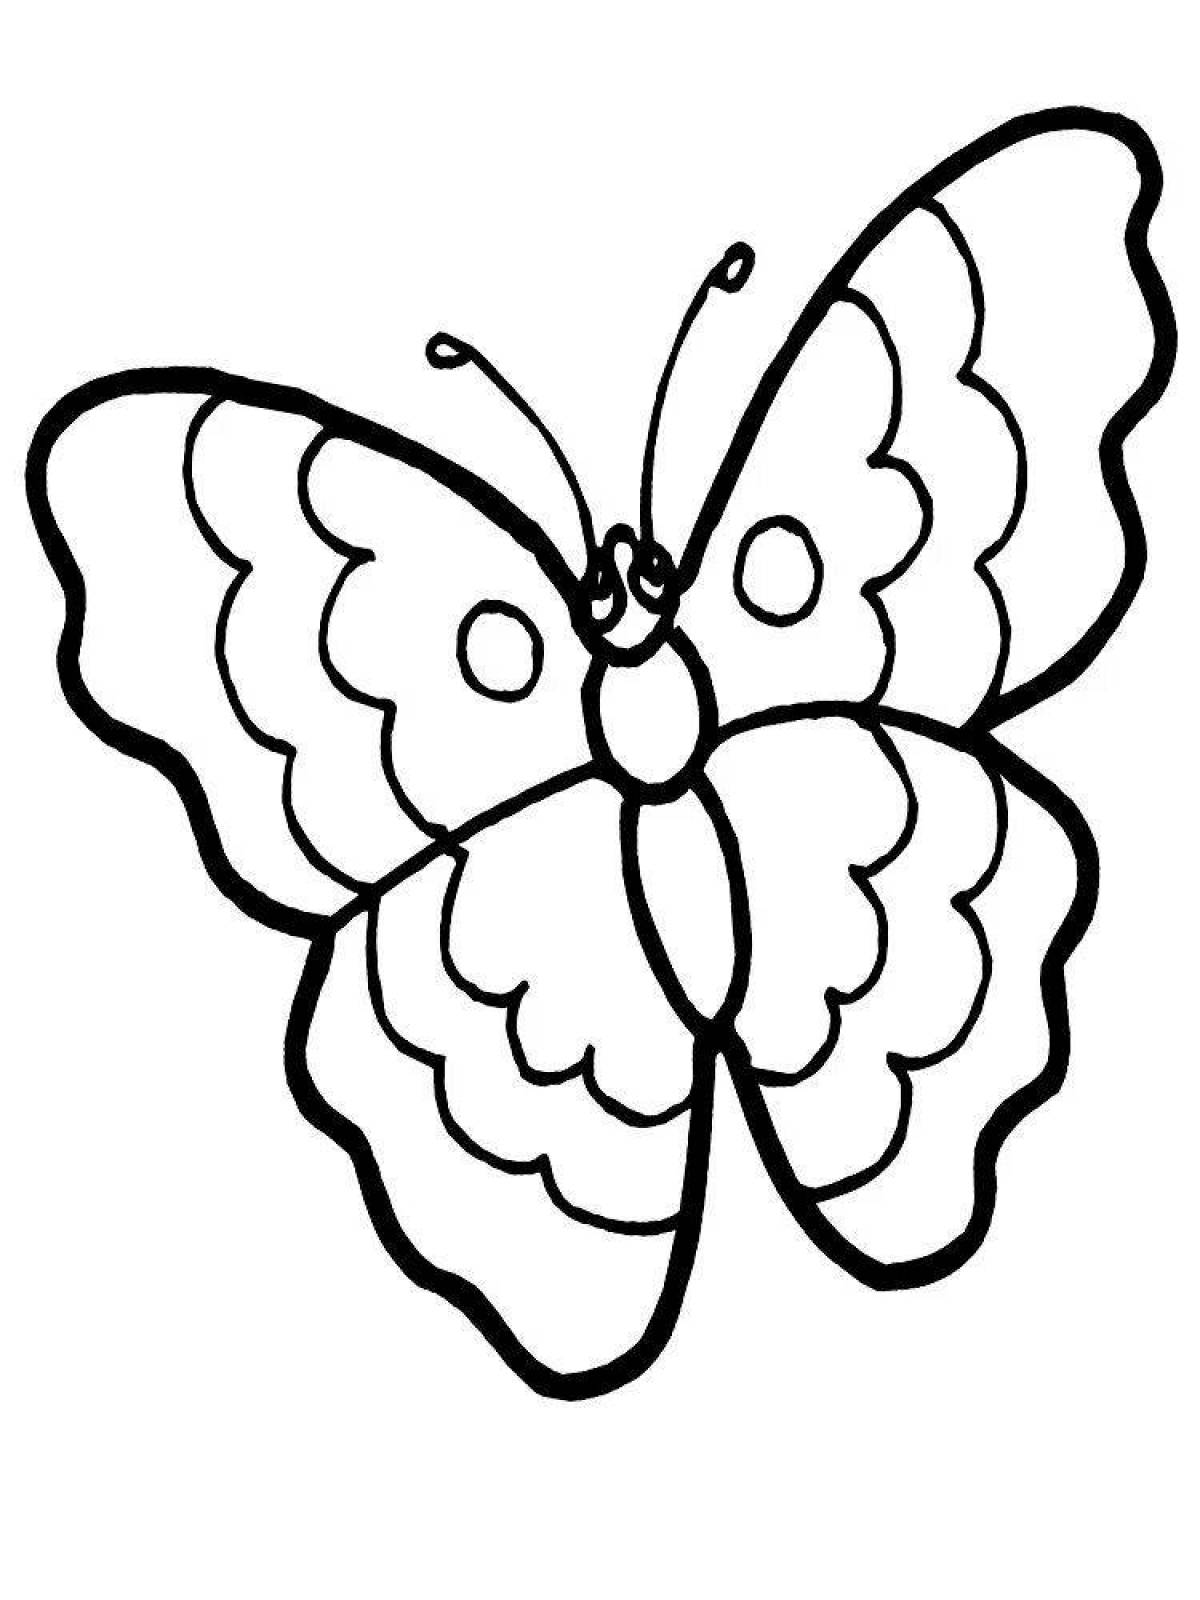 Great butterfly coloring book for kids